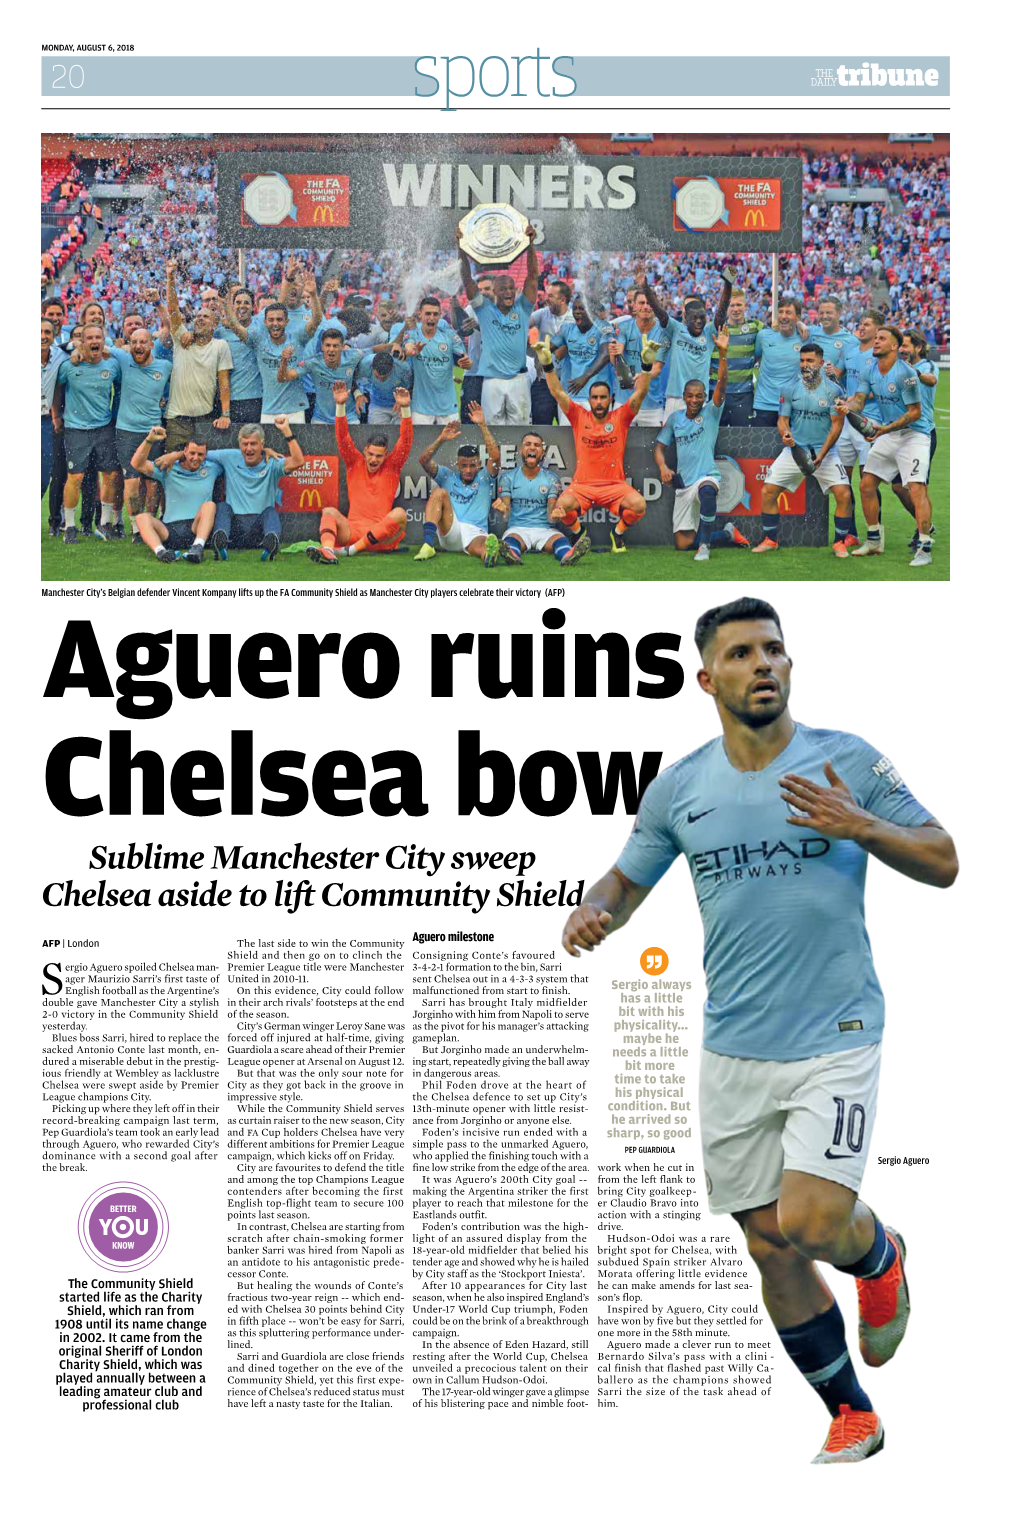 Sublime Manchester City Sweep Chelsea Aside to Lift Community Shield